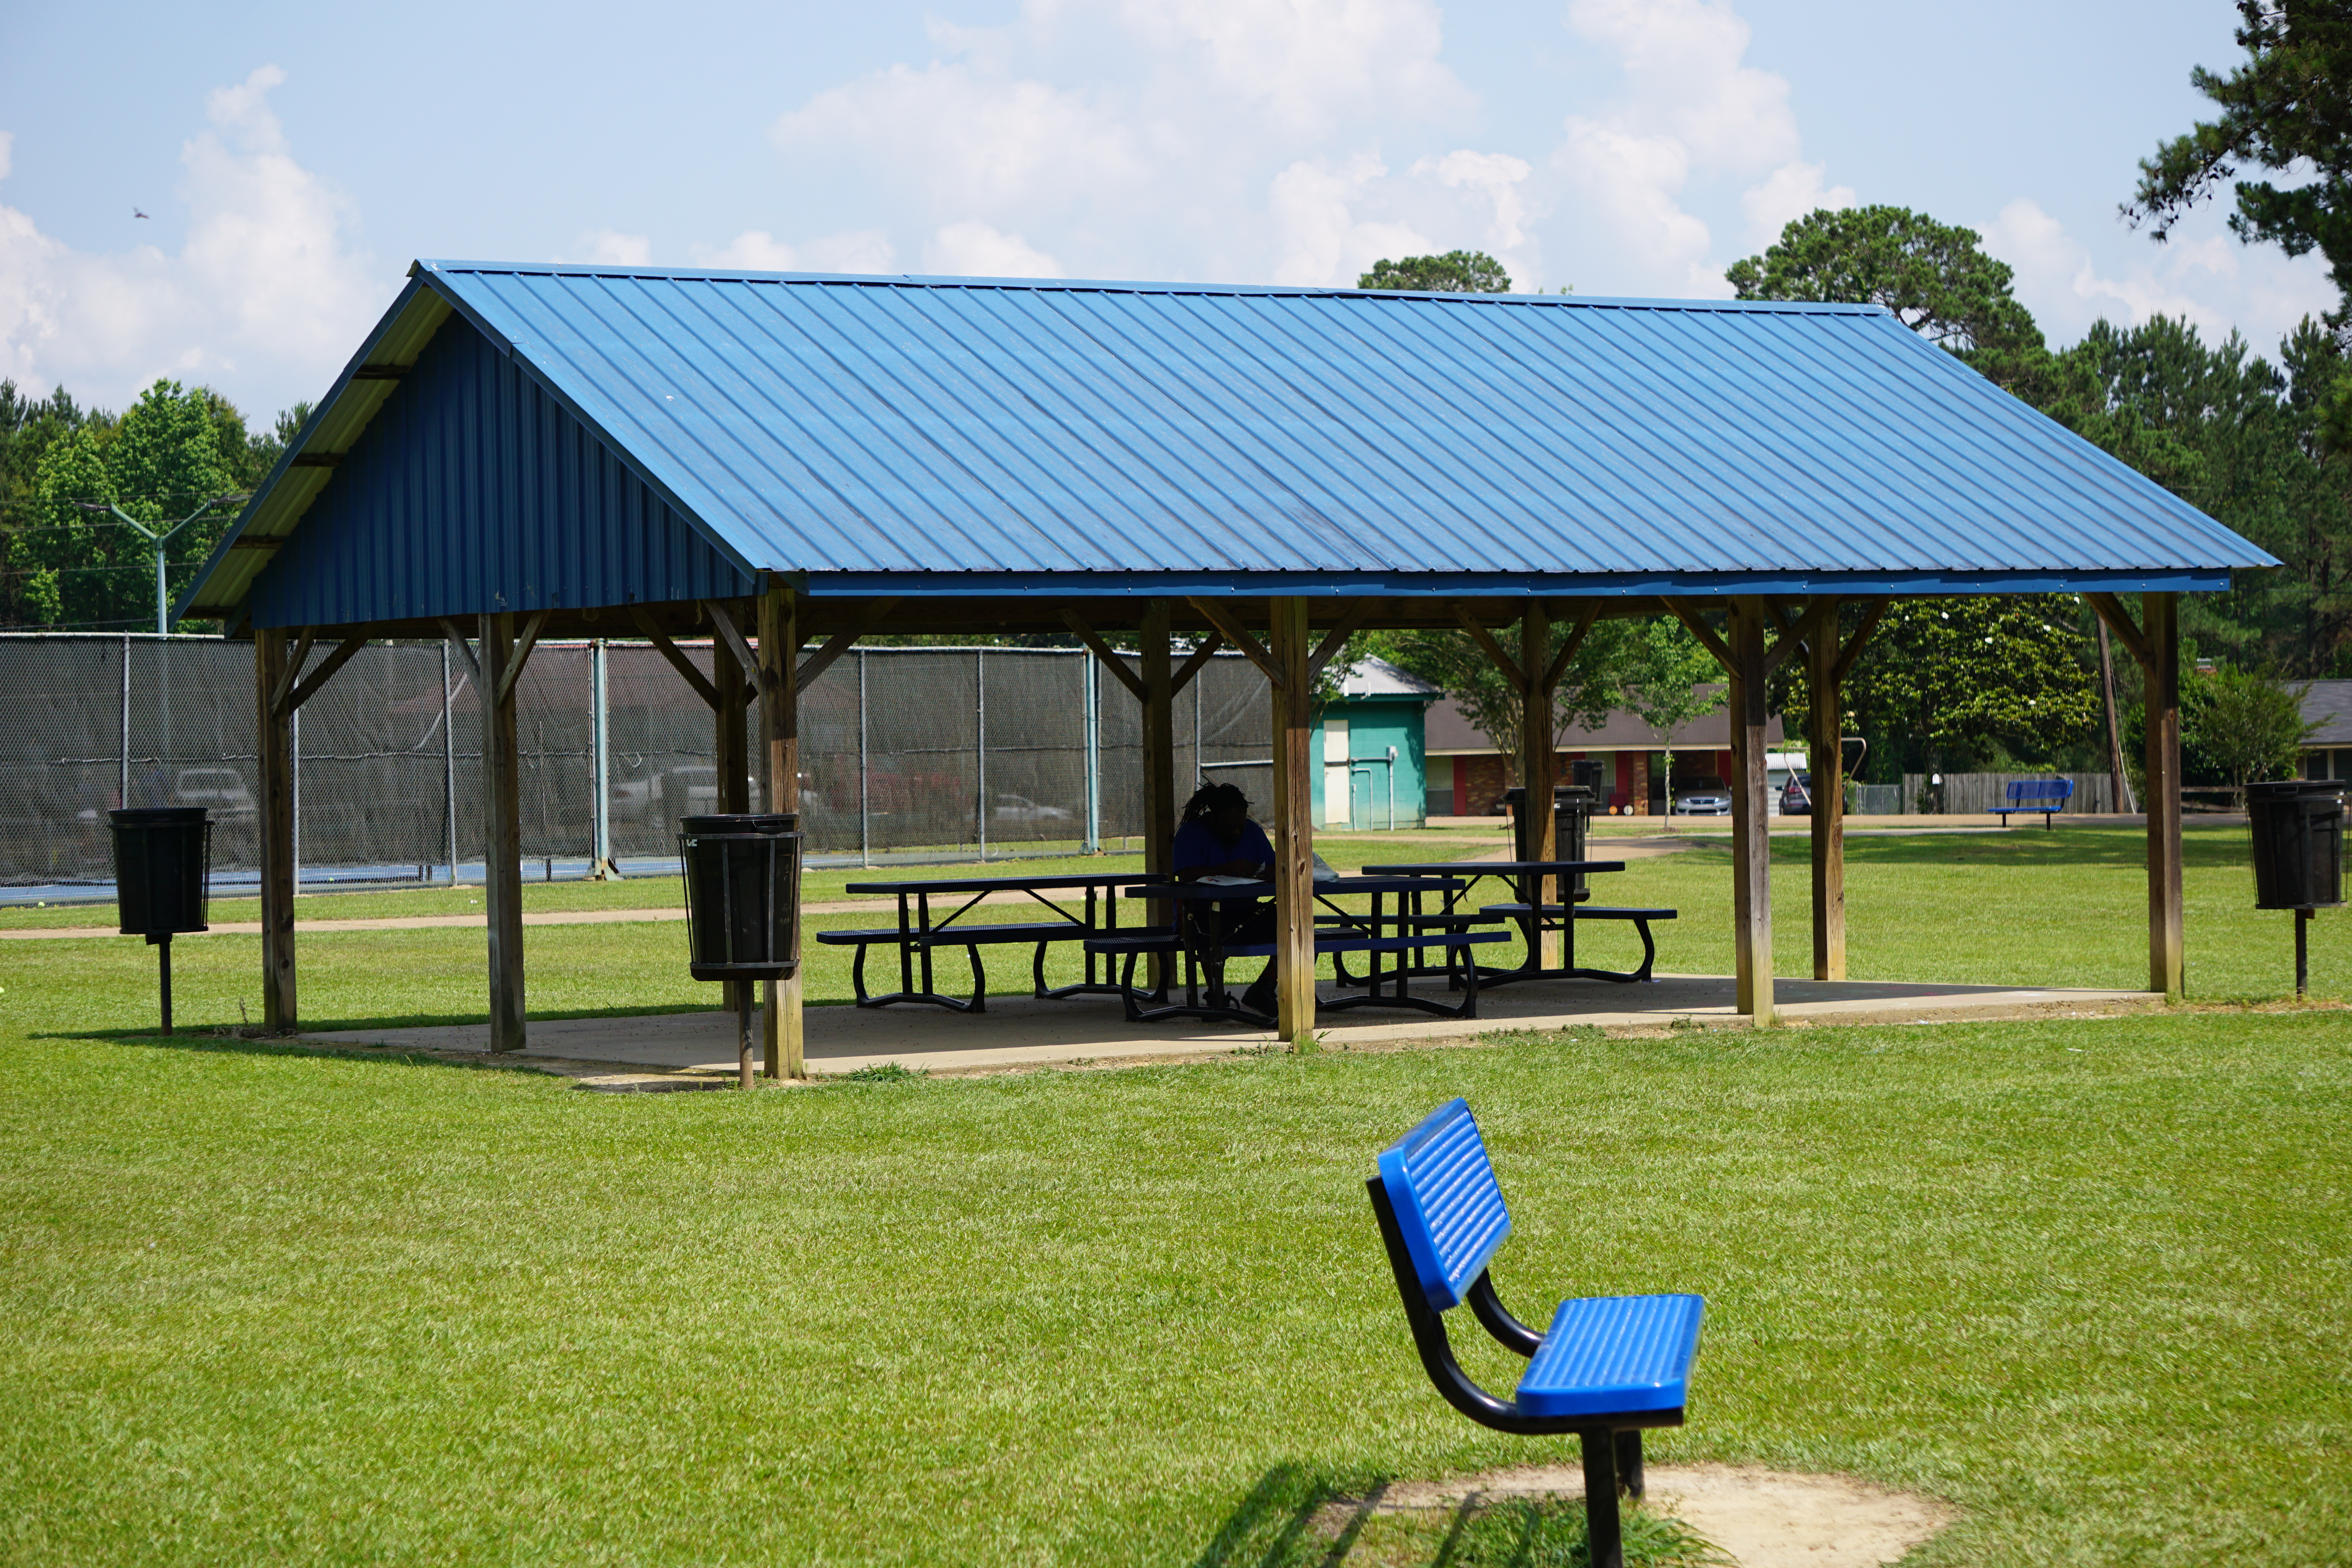 Brookhaven Parks and Recreation Department